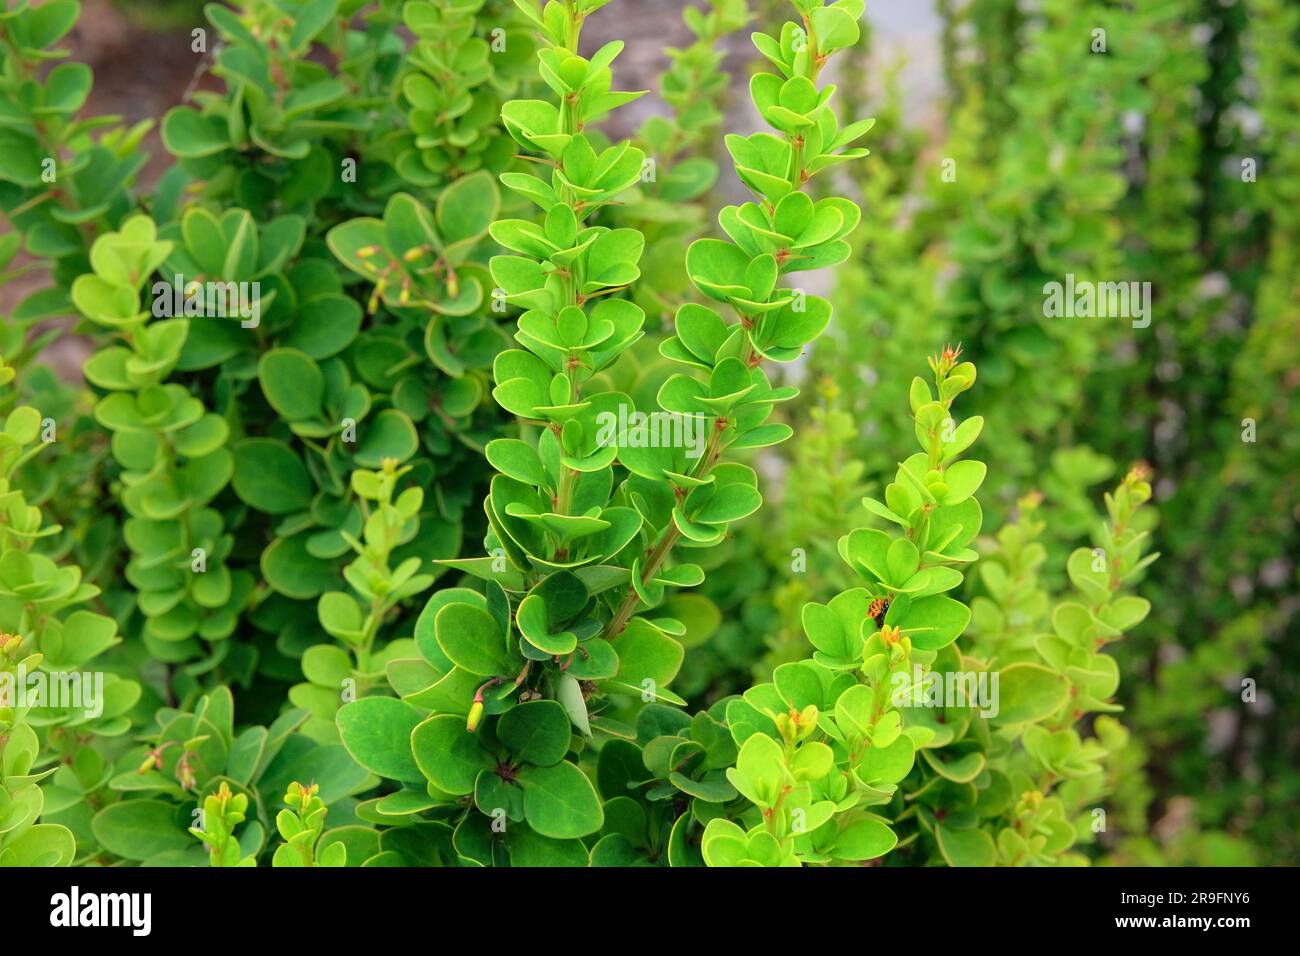 Berberis thunbergii. Decorative green bright bushes on streets of city. Landscaping and decoration in springtime season. Stock Photo